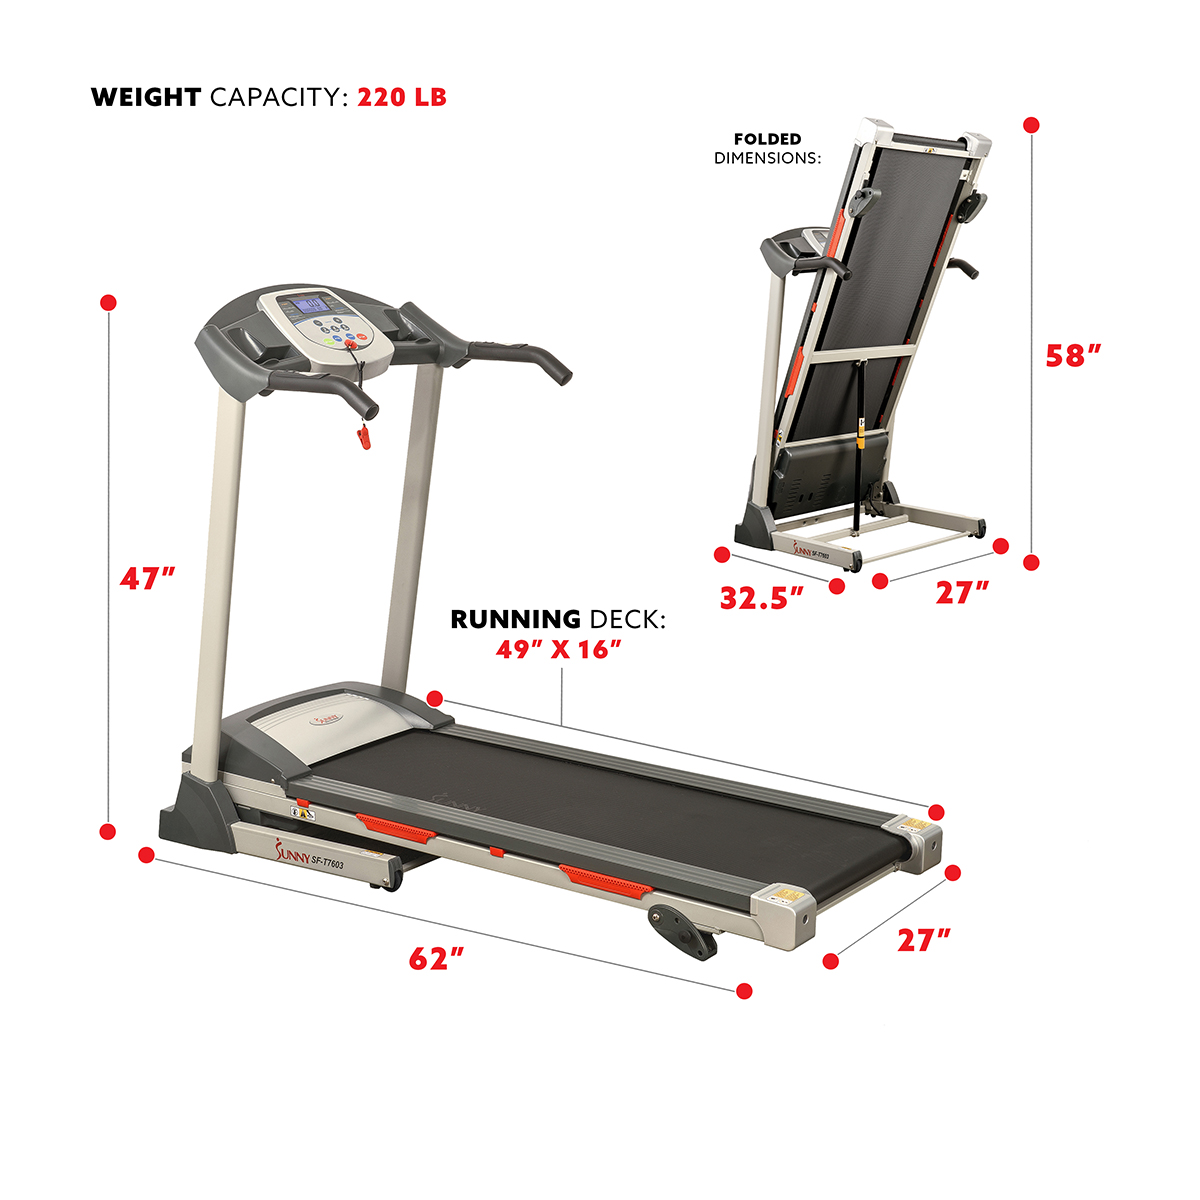 Sunny Health & Fitness Powerful Electric Treadmill for Home, Foldable, Manual Incline, Built-In Programs, Pulse Sensor, SF-T7603 - image 5 of 8